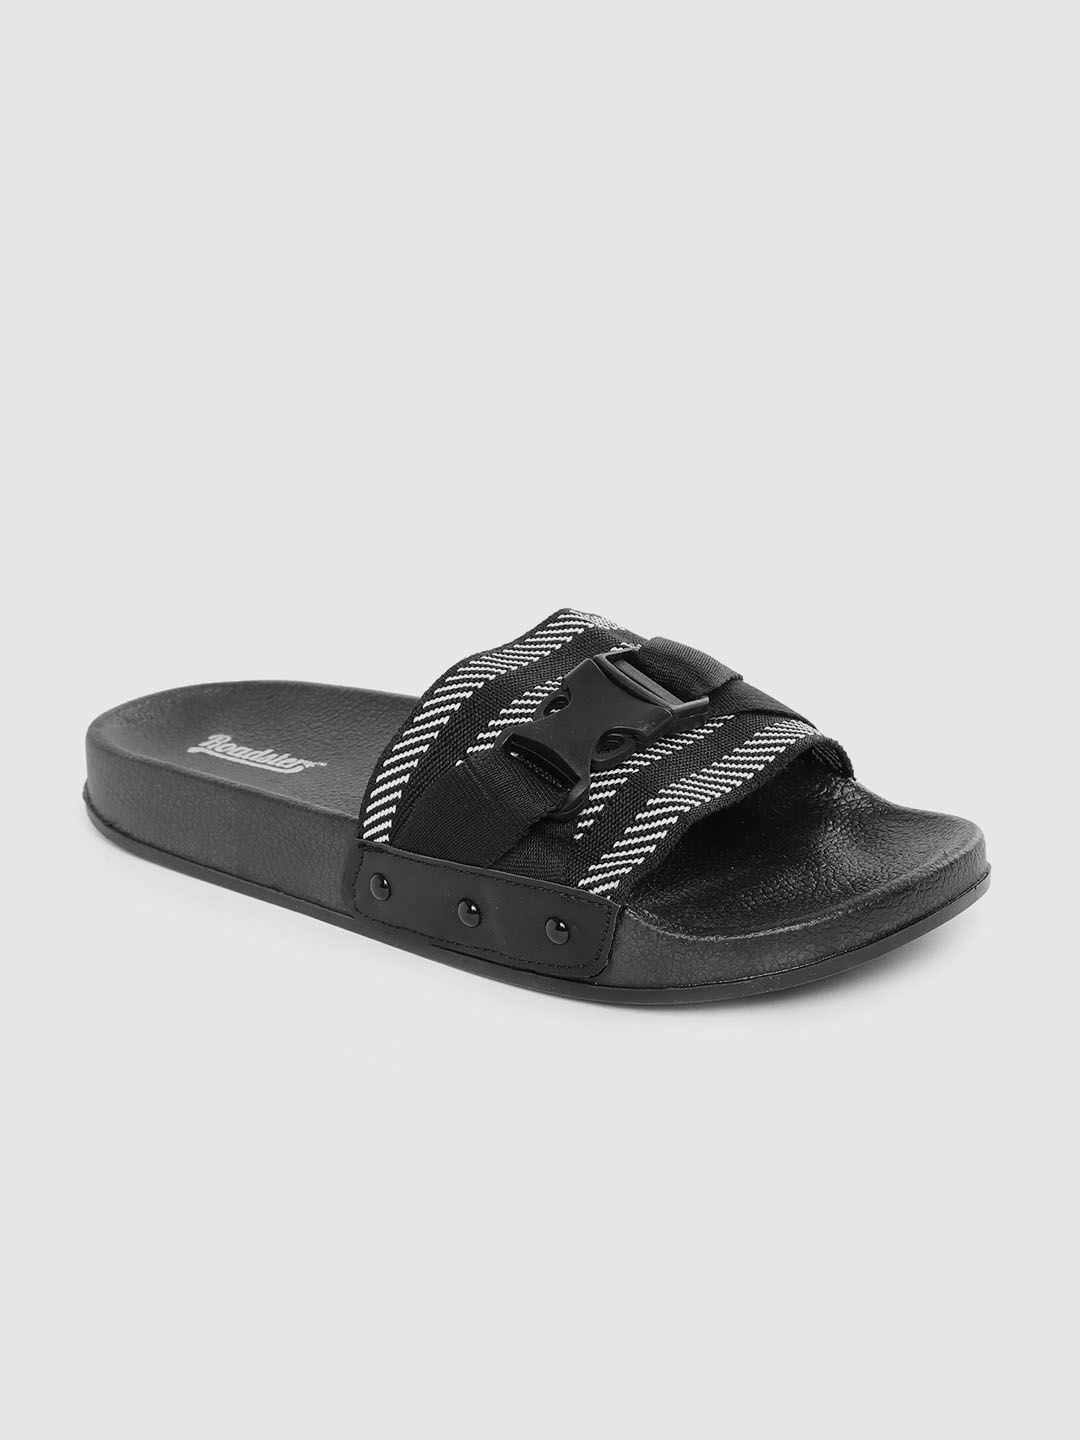 The Roadster Lifestyle Co Women Black & White Striped Flip Flops with Click Buckle Detail Price in India